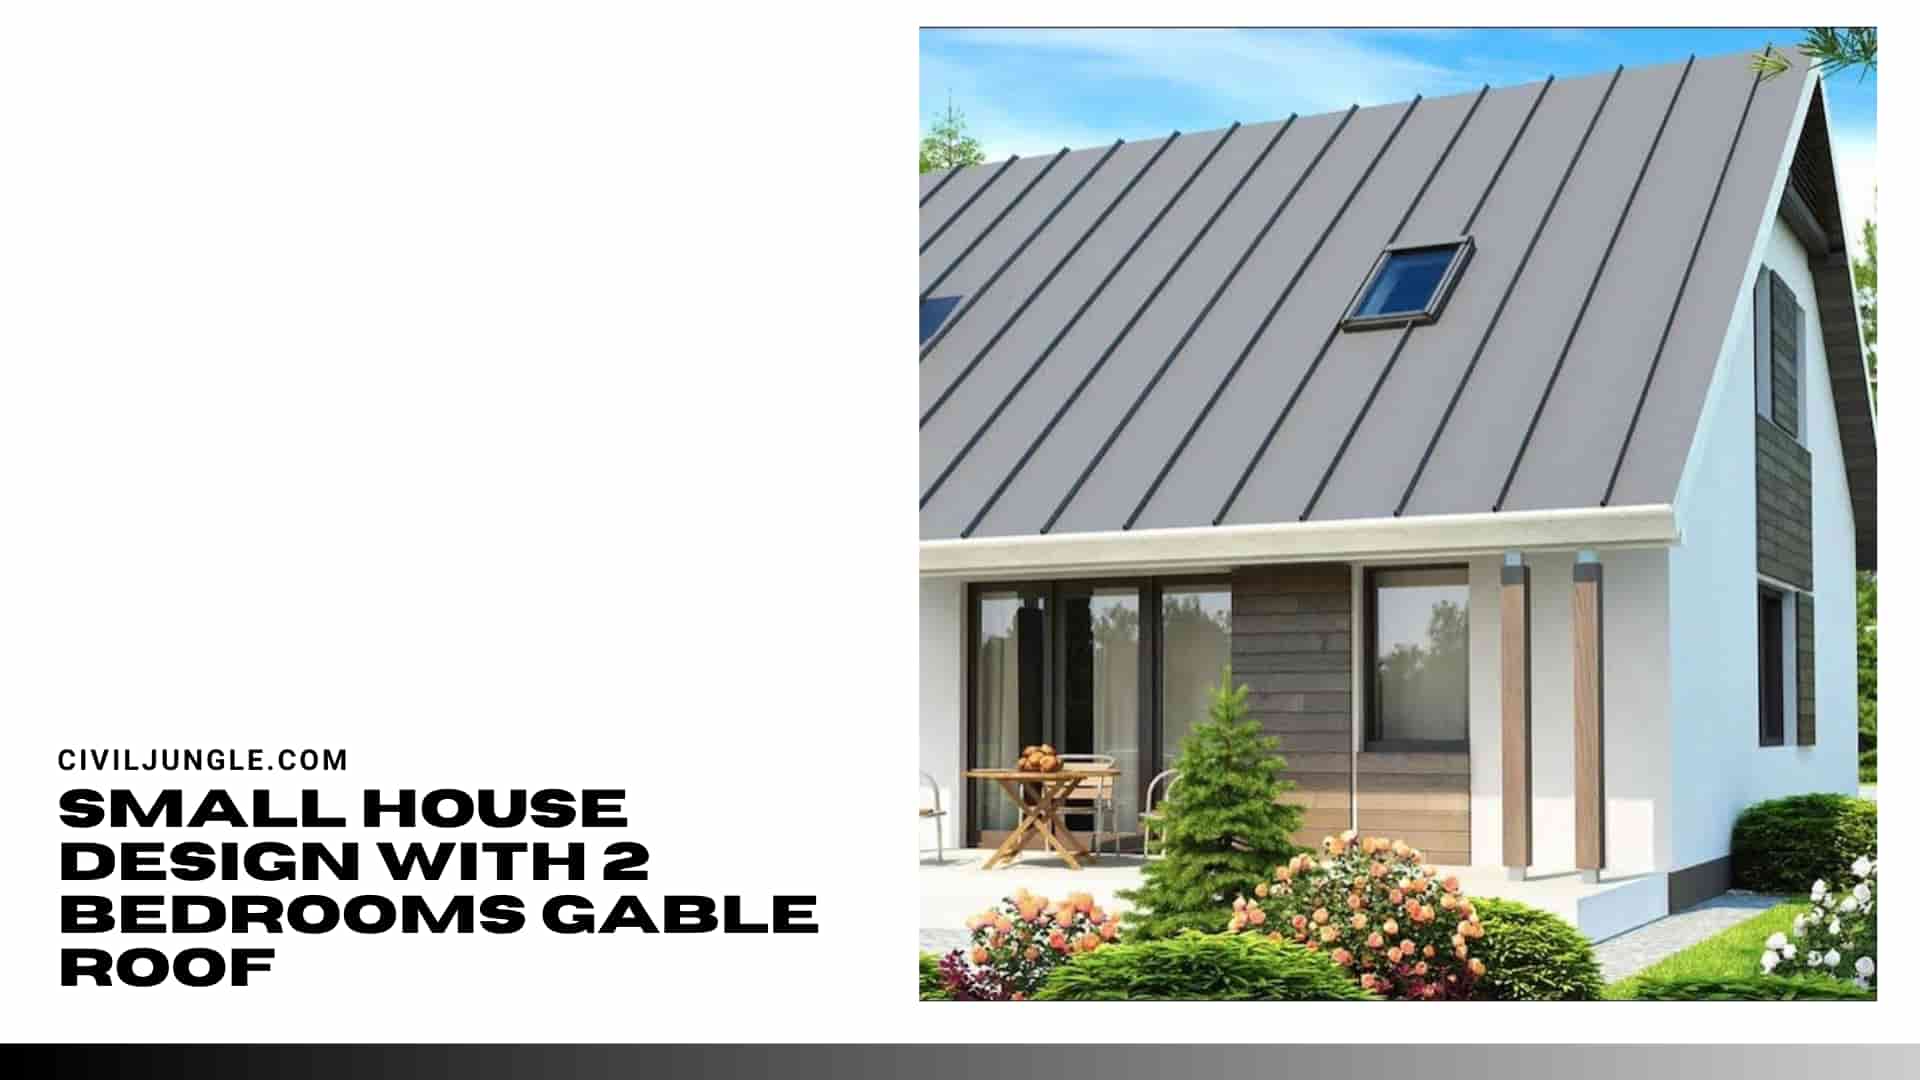 Small House Design With 2 Bedrooms Gable Roof